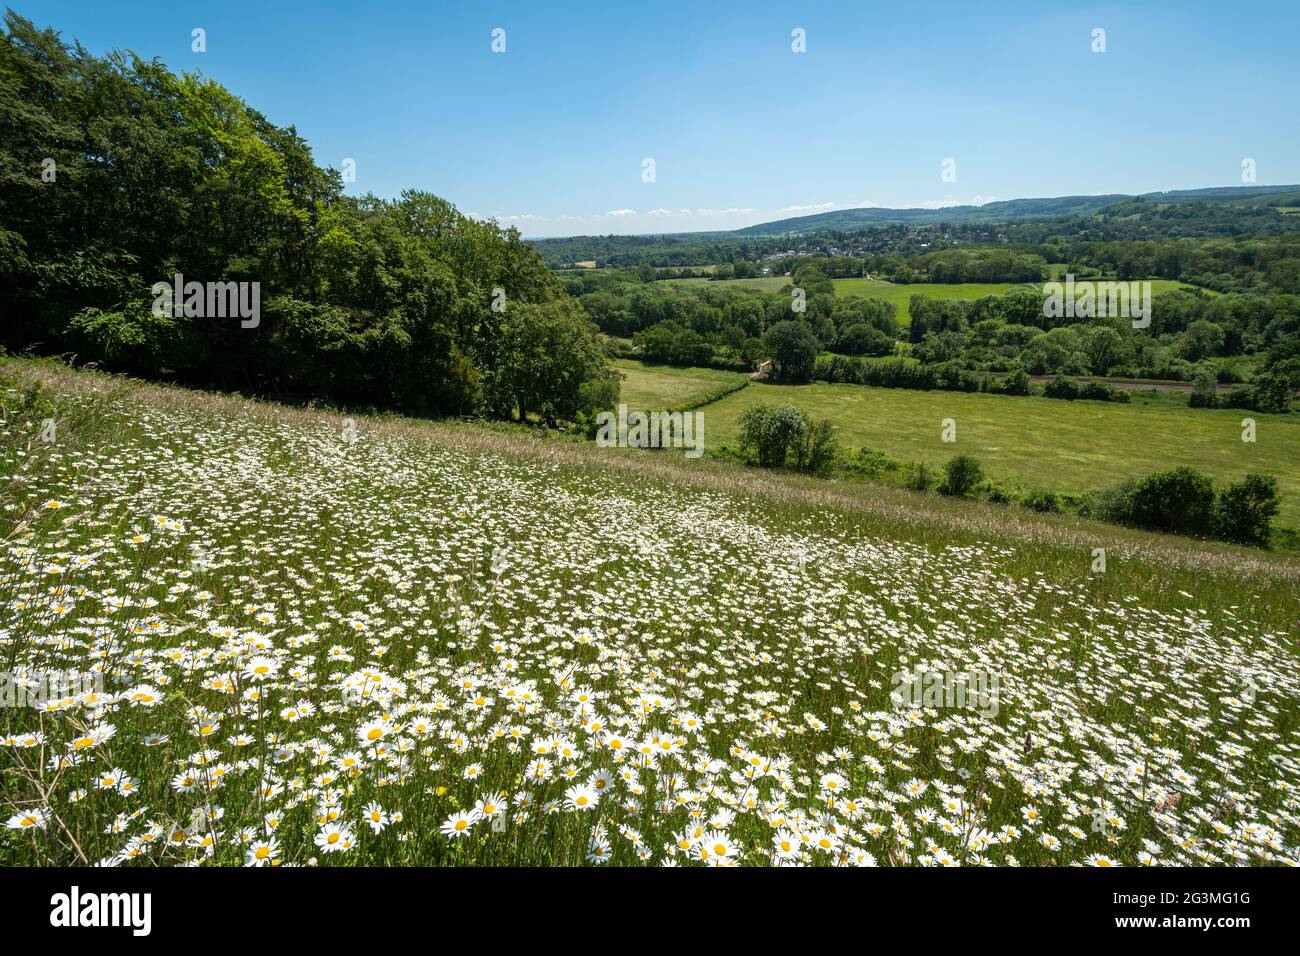 View of Denbies Hillside on Ranmore Common in the North Downs, Surrey Hills, England, UK, during June or Summer with wildflowers Stock Photo